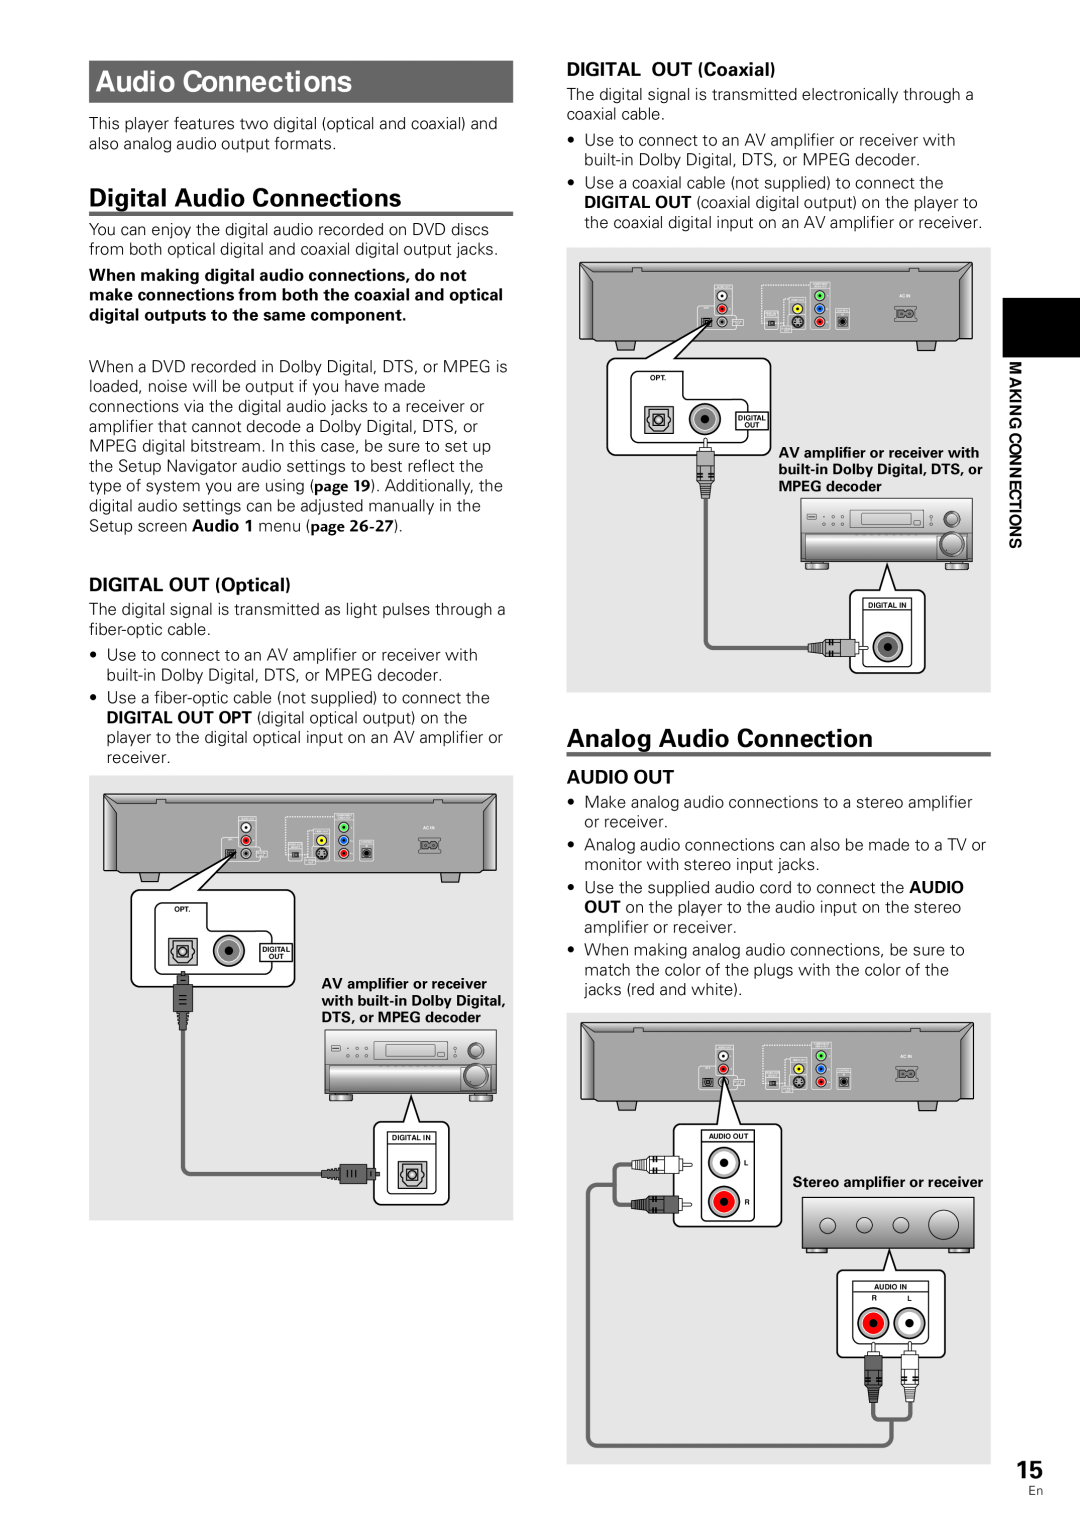 Pioneer DV-343 Digital Audio Connections, Analog Audio Connection, DIGITAL OUT Coaxial, DIGITAL OUT Optical, Audio Out 